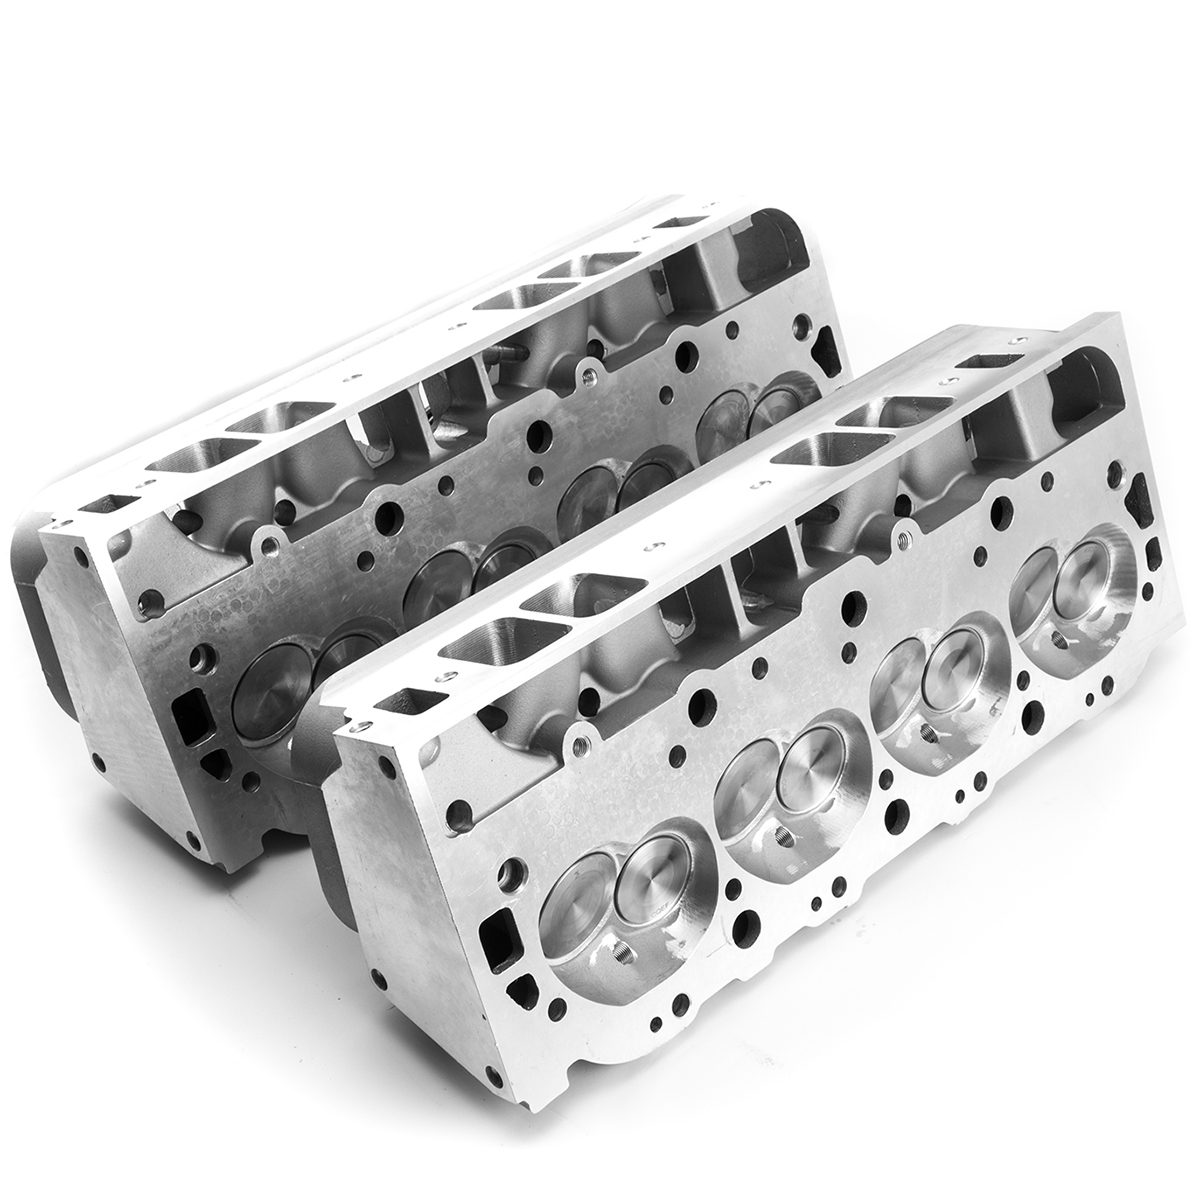 Upgrade your Big Block Chevy with a set of Speedmaster Cylinder Heads ...